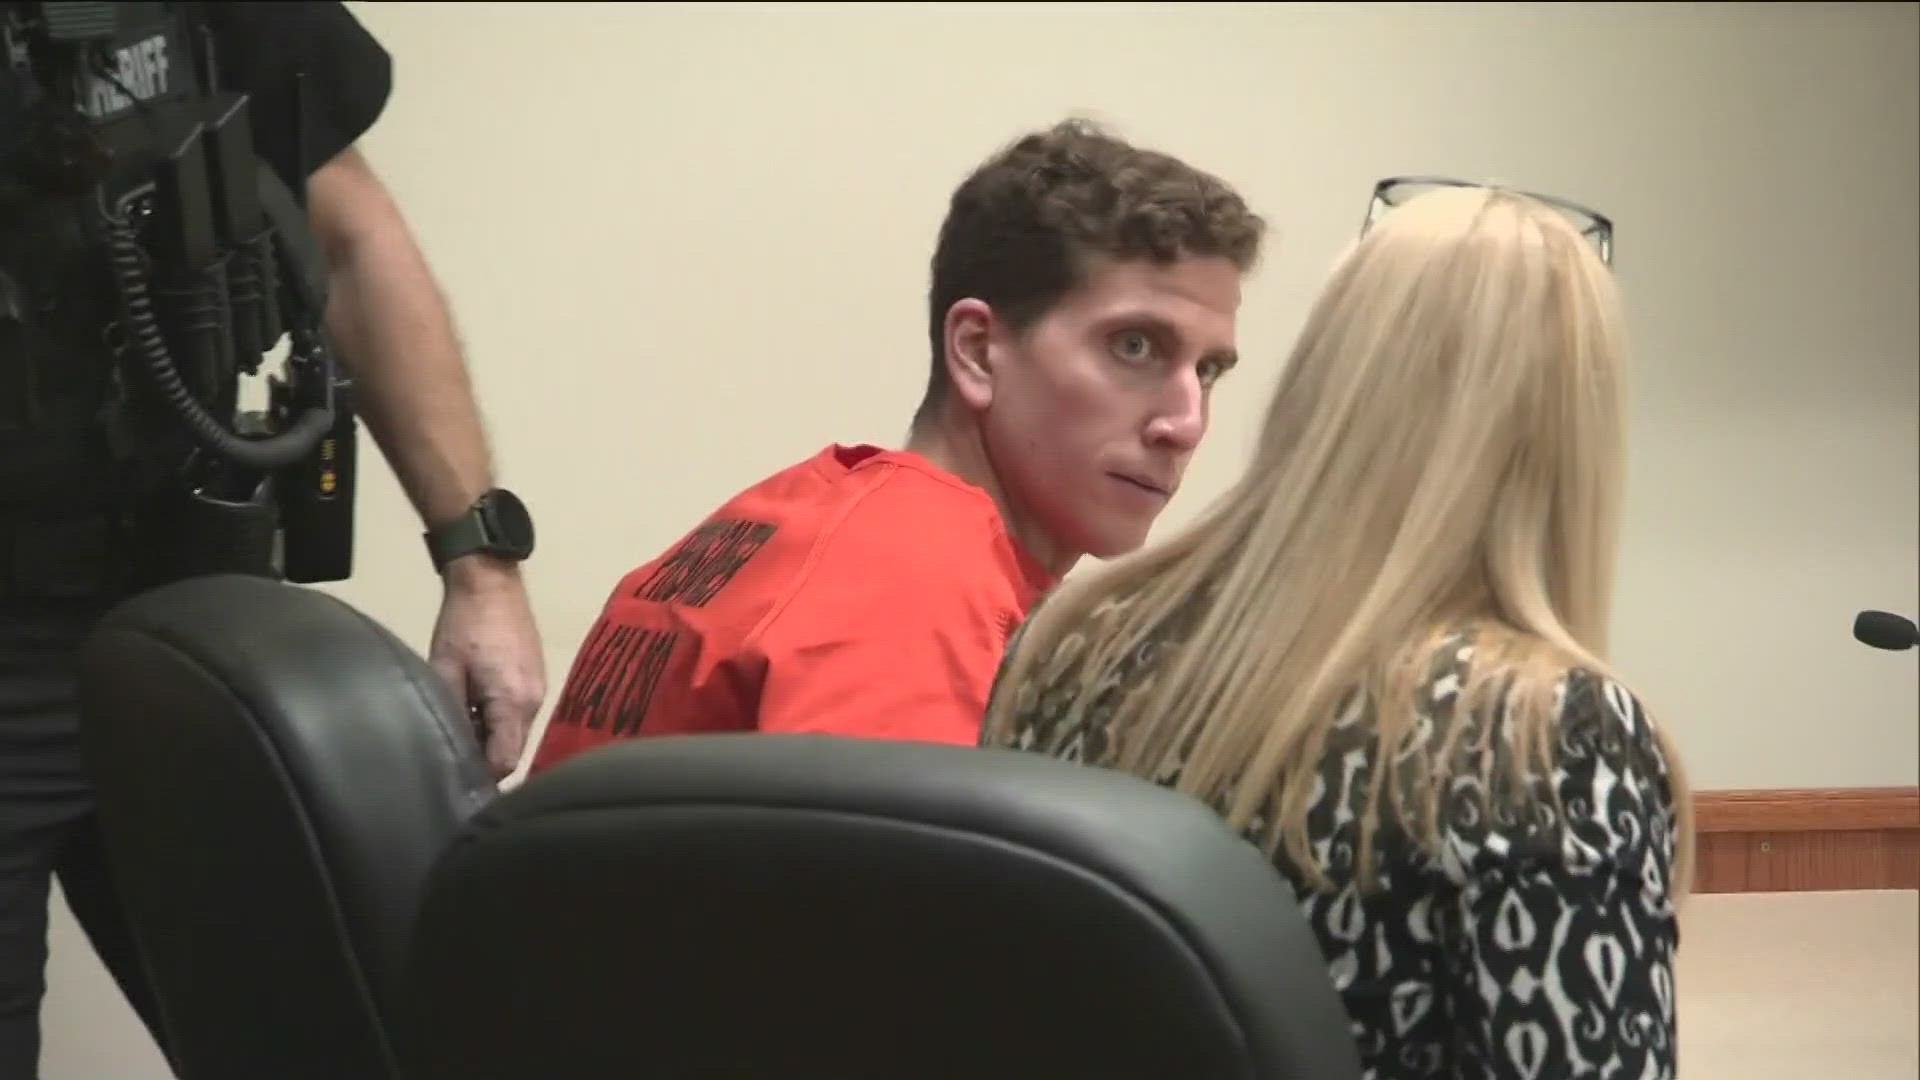 Kohberger is accused of killing four University of Idaho students in November of 2022.